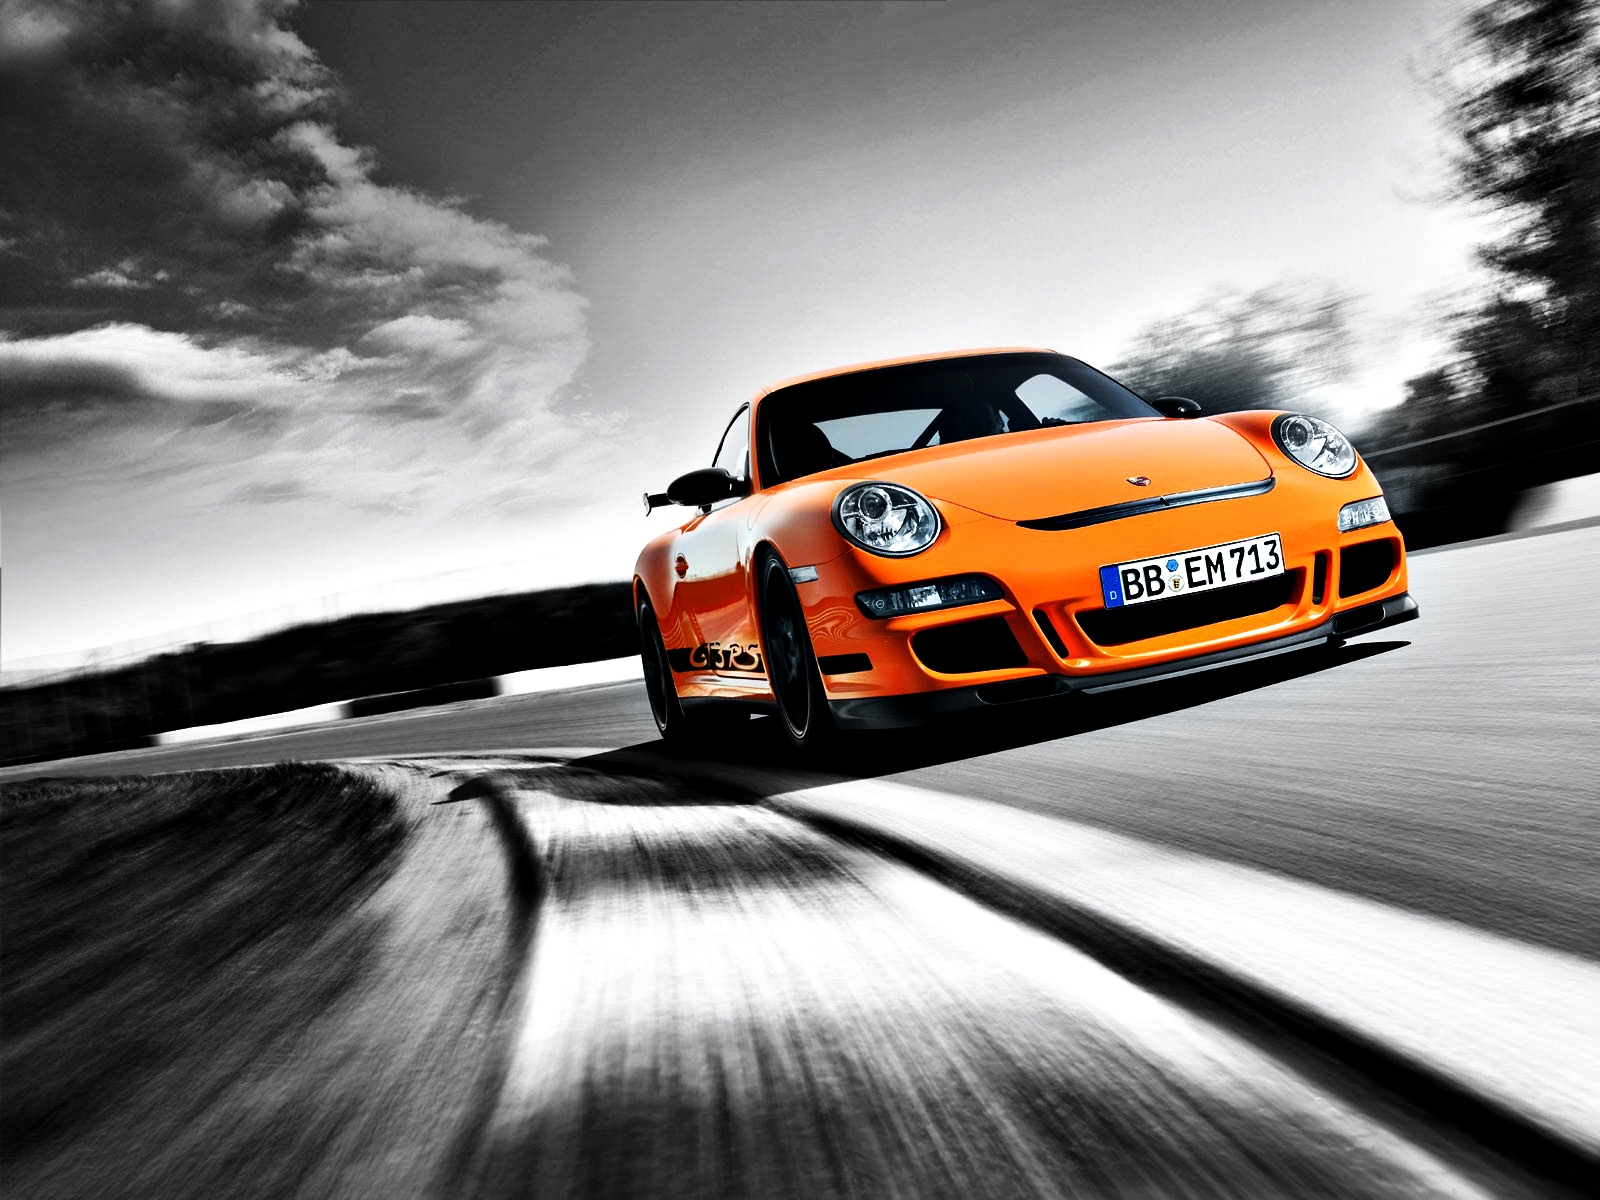 HD car Wallpapers is the no1 source of Car wallpapers 1600x1200